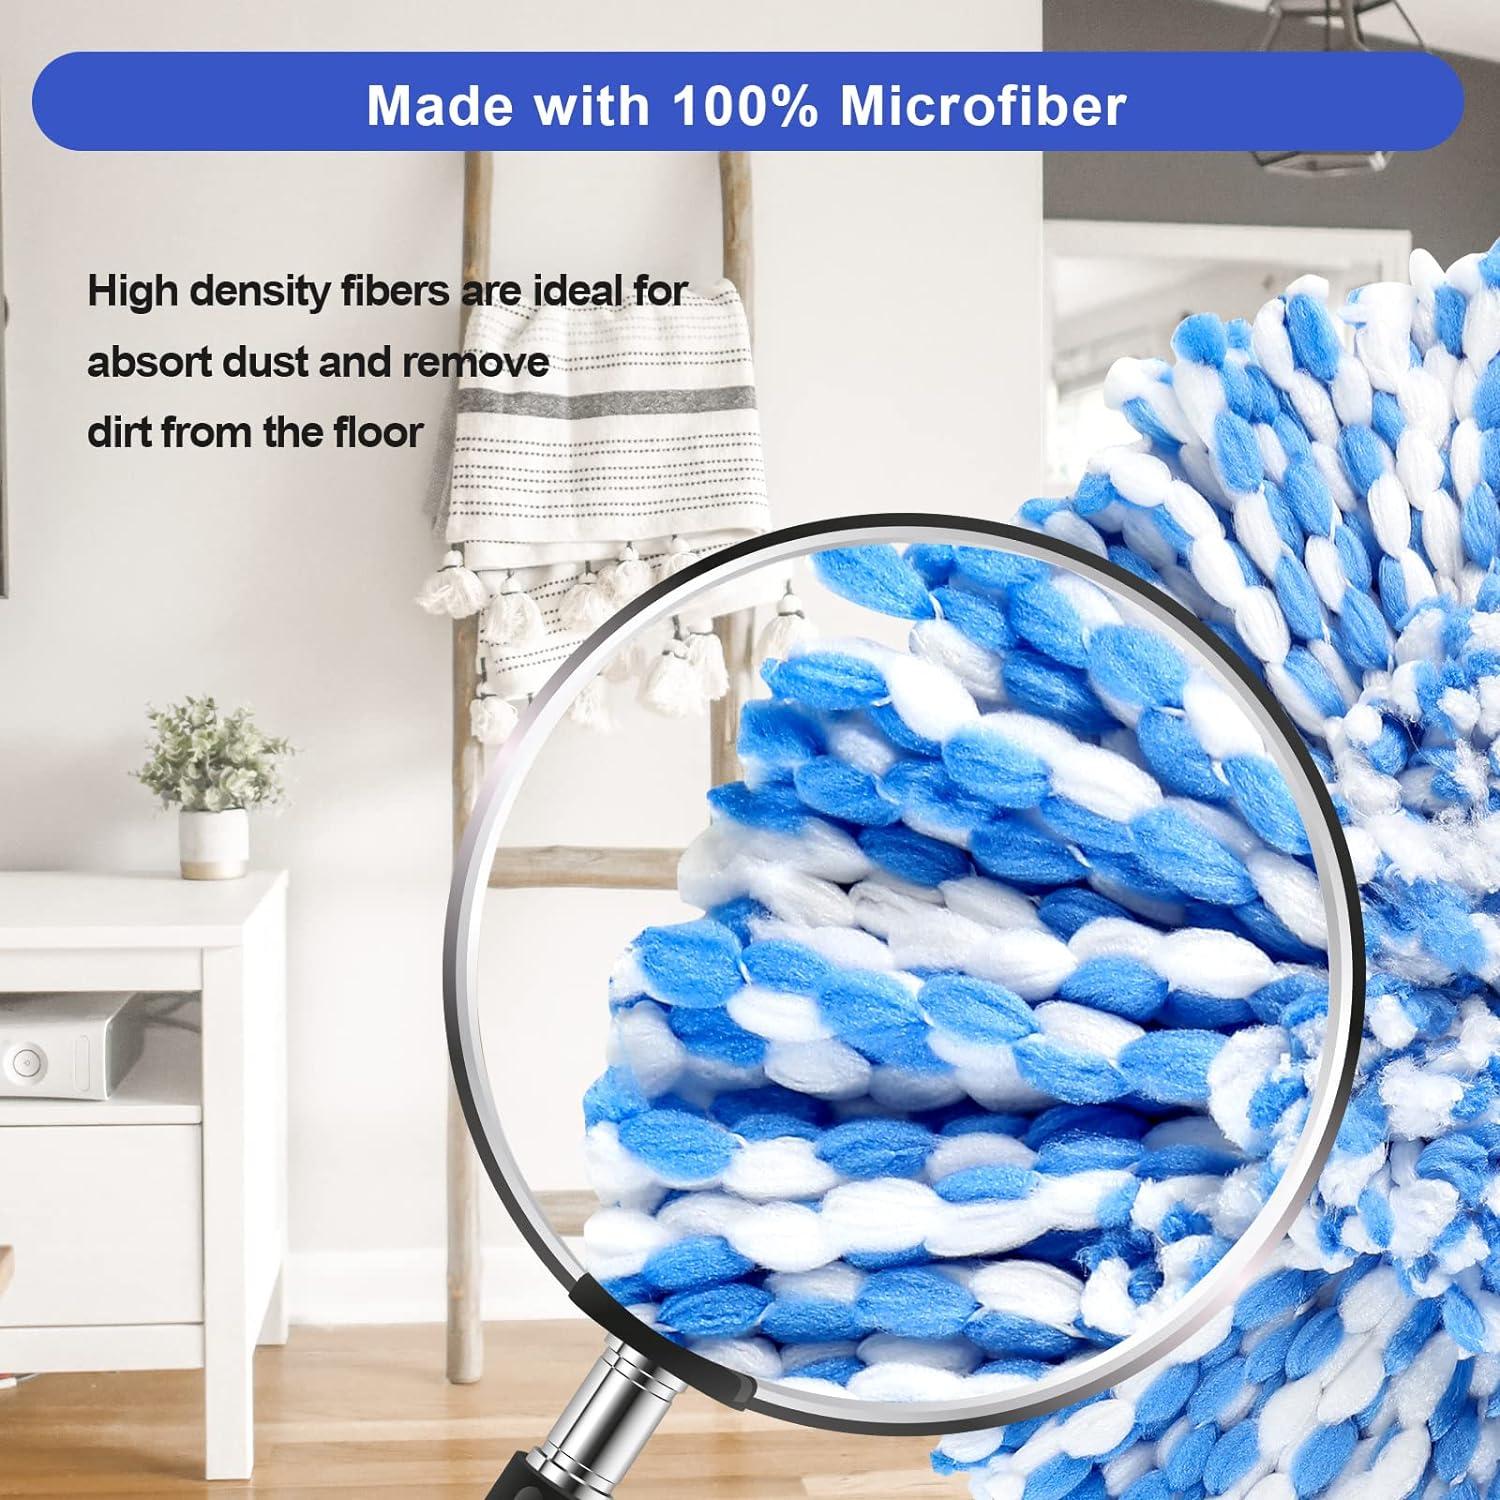 4Pack Spin Mop Replacement Head - 2 Tank RinseClean Spin Mop Replace Head  Refills, Blue Microfiber Mop Head Replacement Compatible with O-cedar Mop